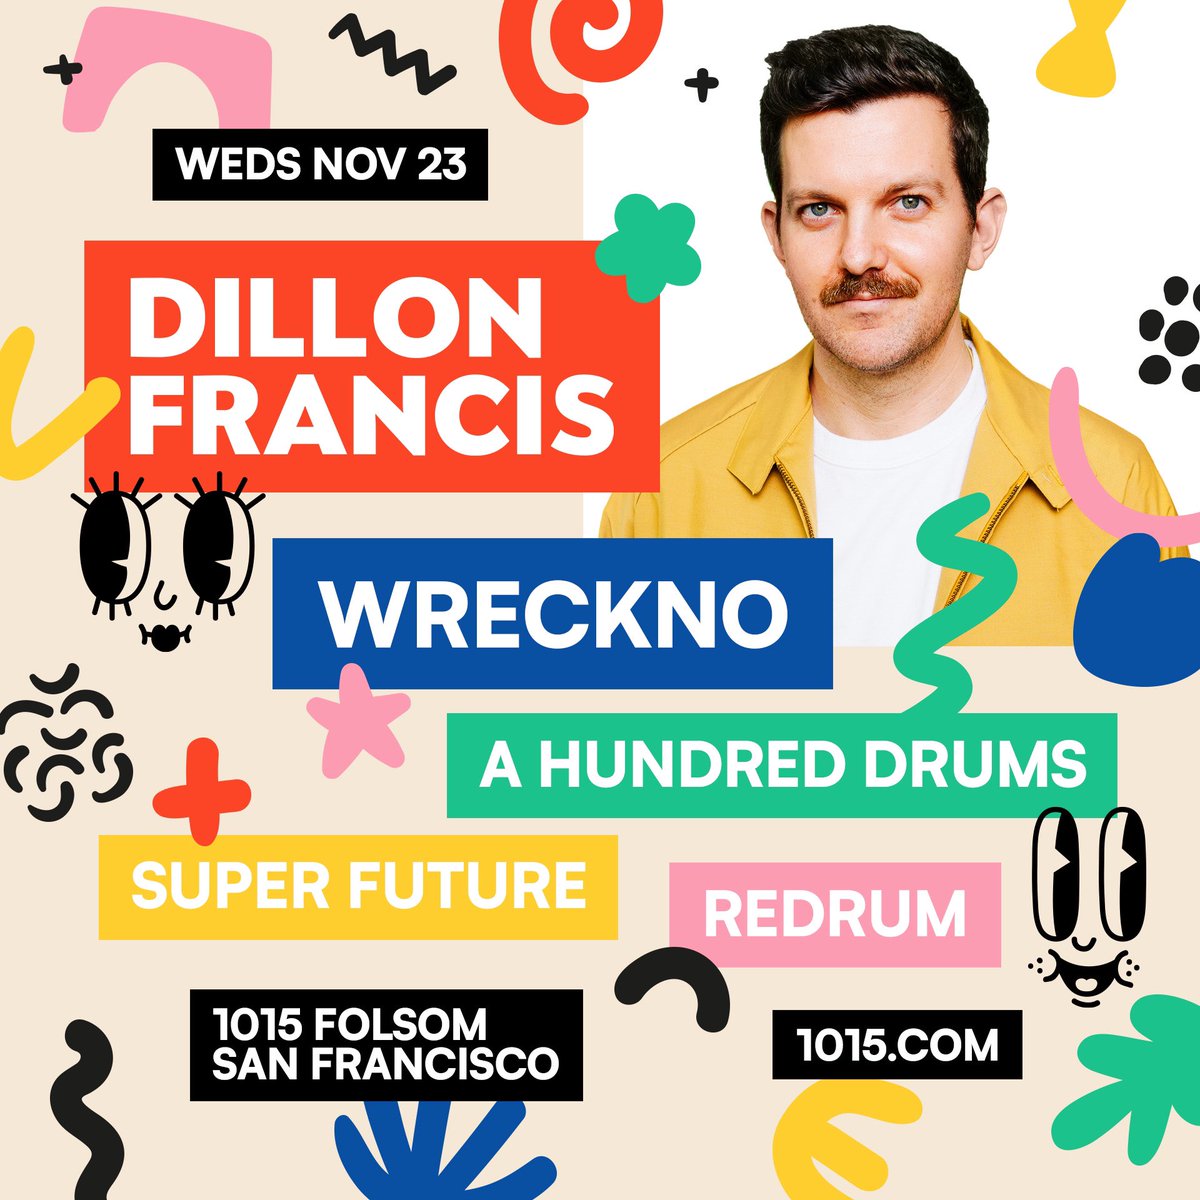 PRE THANKSGIVING SNACK ANYONE? @DillonFrancis headlining on 11•23! Tix: Seetickets.us/dillonfrancis1…